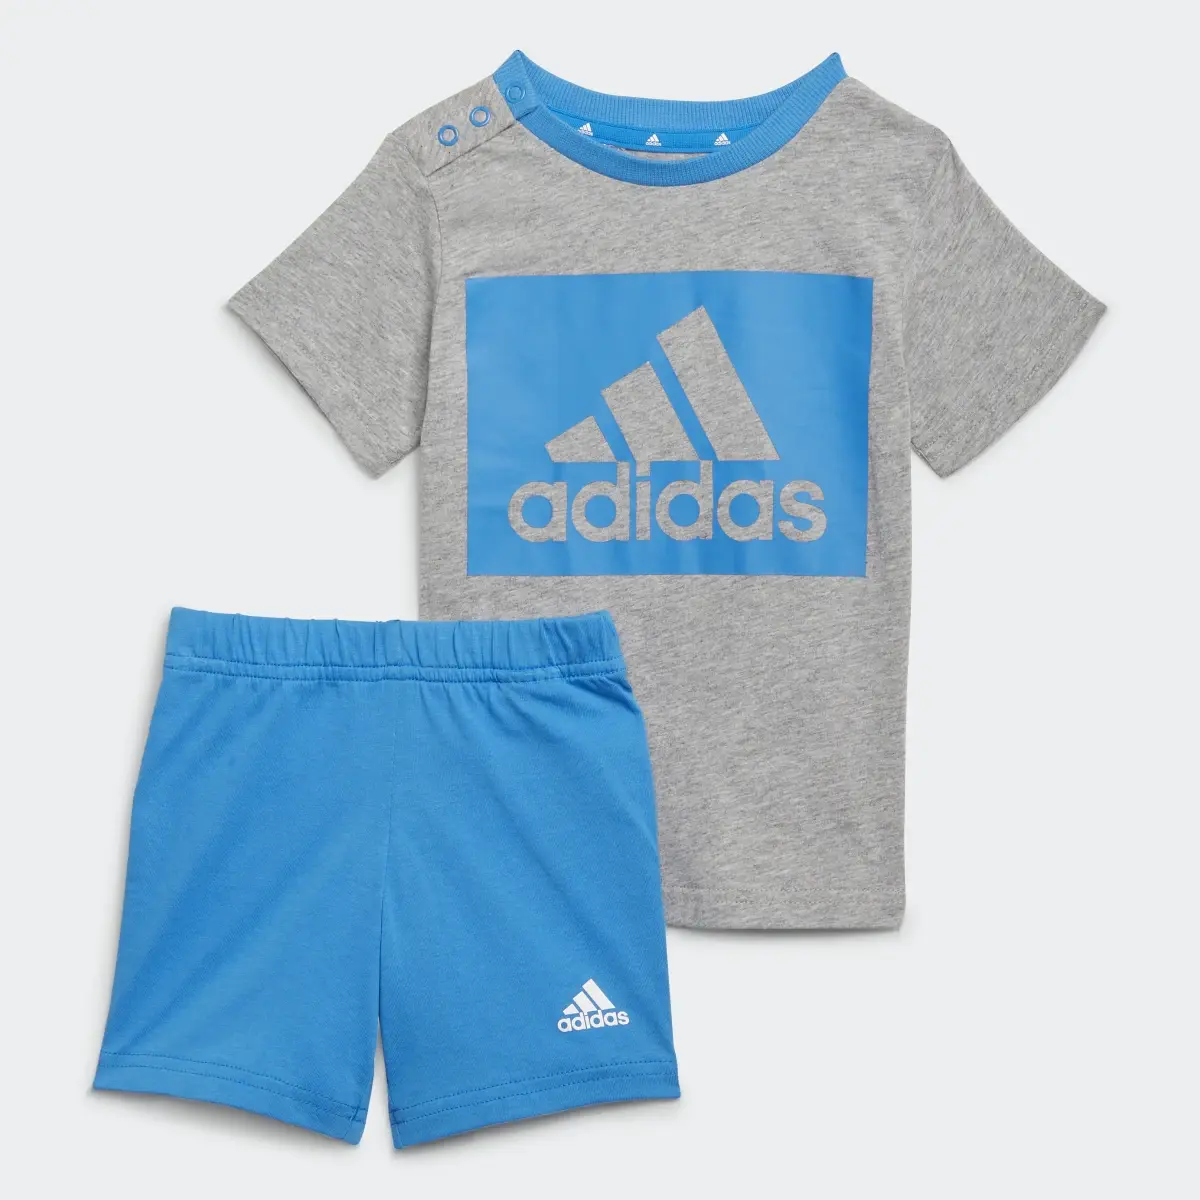 Adidas Completo Essentials Tee and Shorts. 1